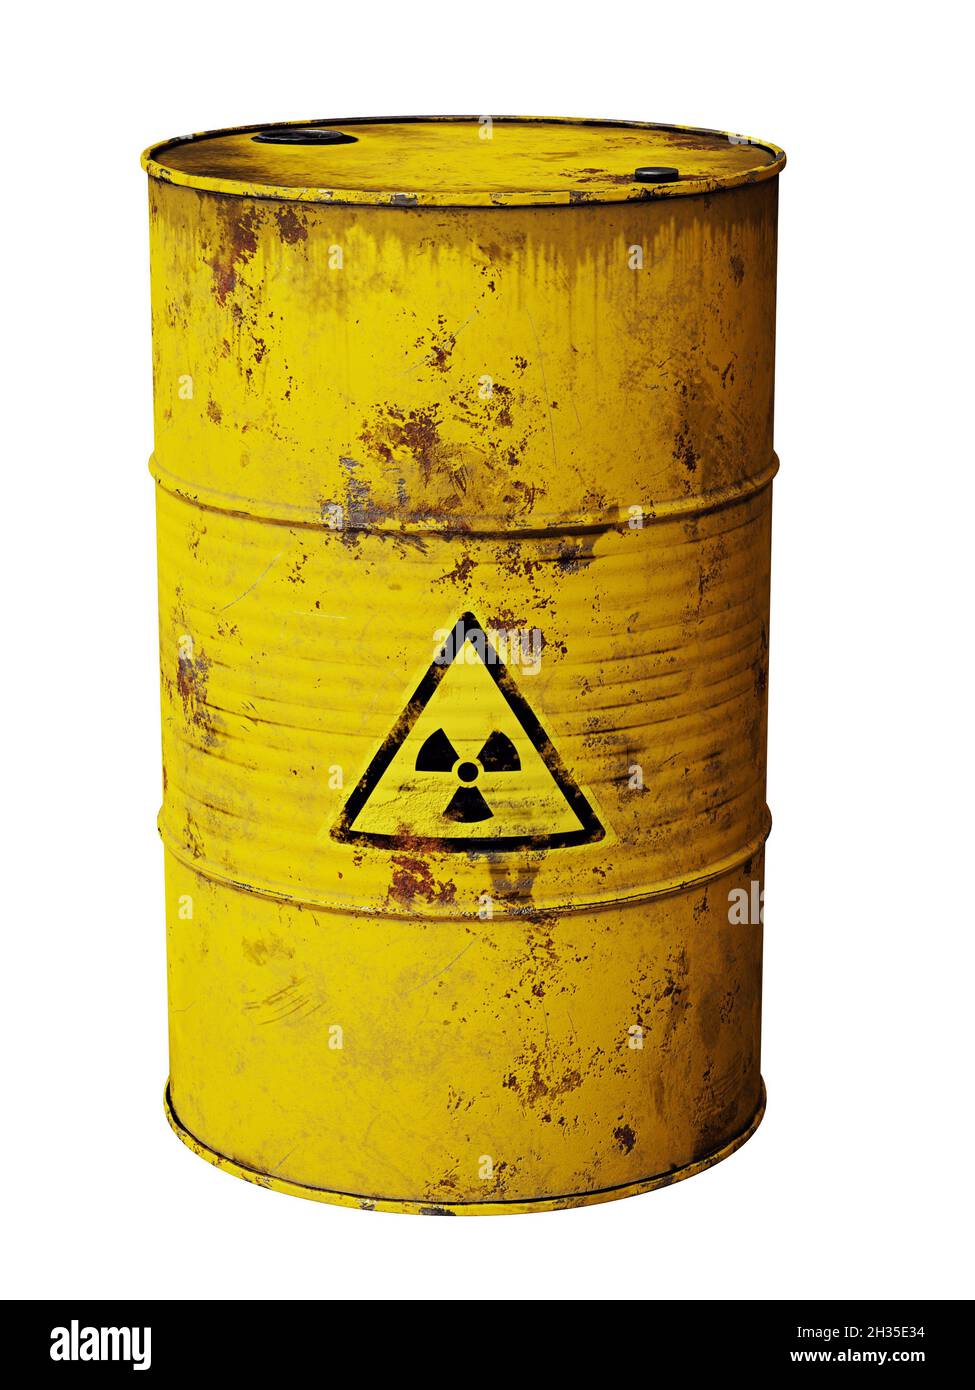 radioactive waste in rusty barrel, isolated on white background Stock Photo